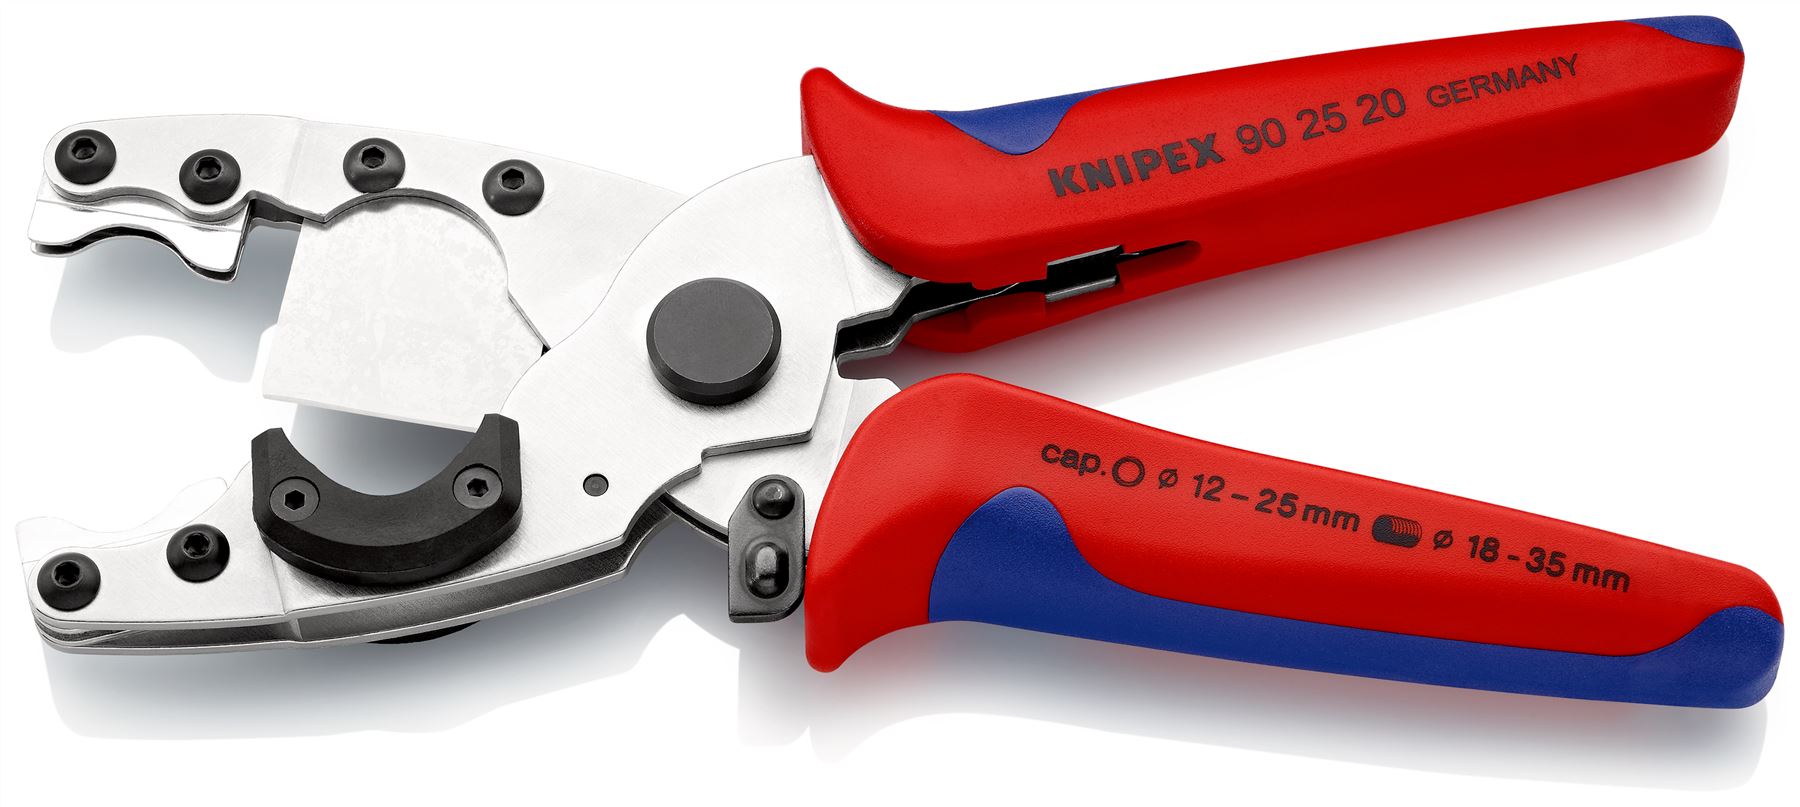 KNIPEX Pipe Cutter for Composite Pipes and Protective Tubes 210mm Multi Component Grips 90 25 20 SB